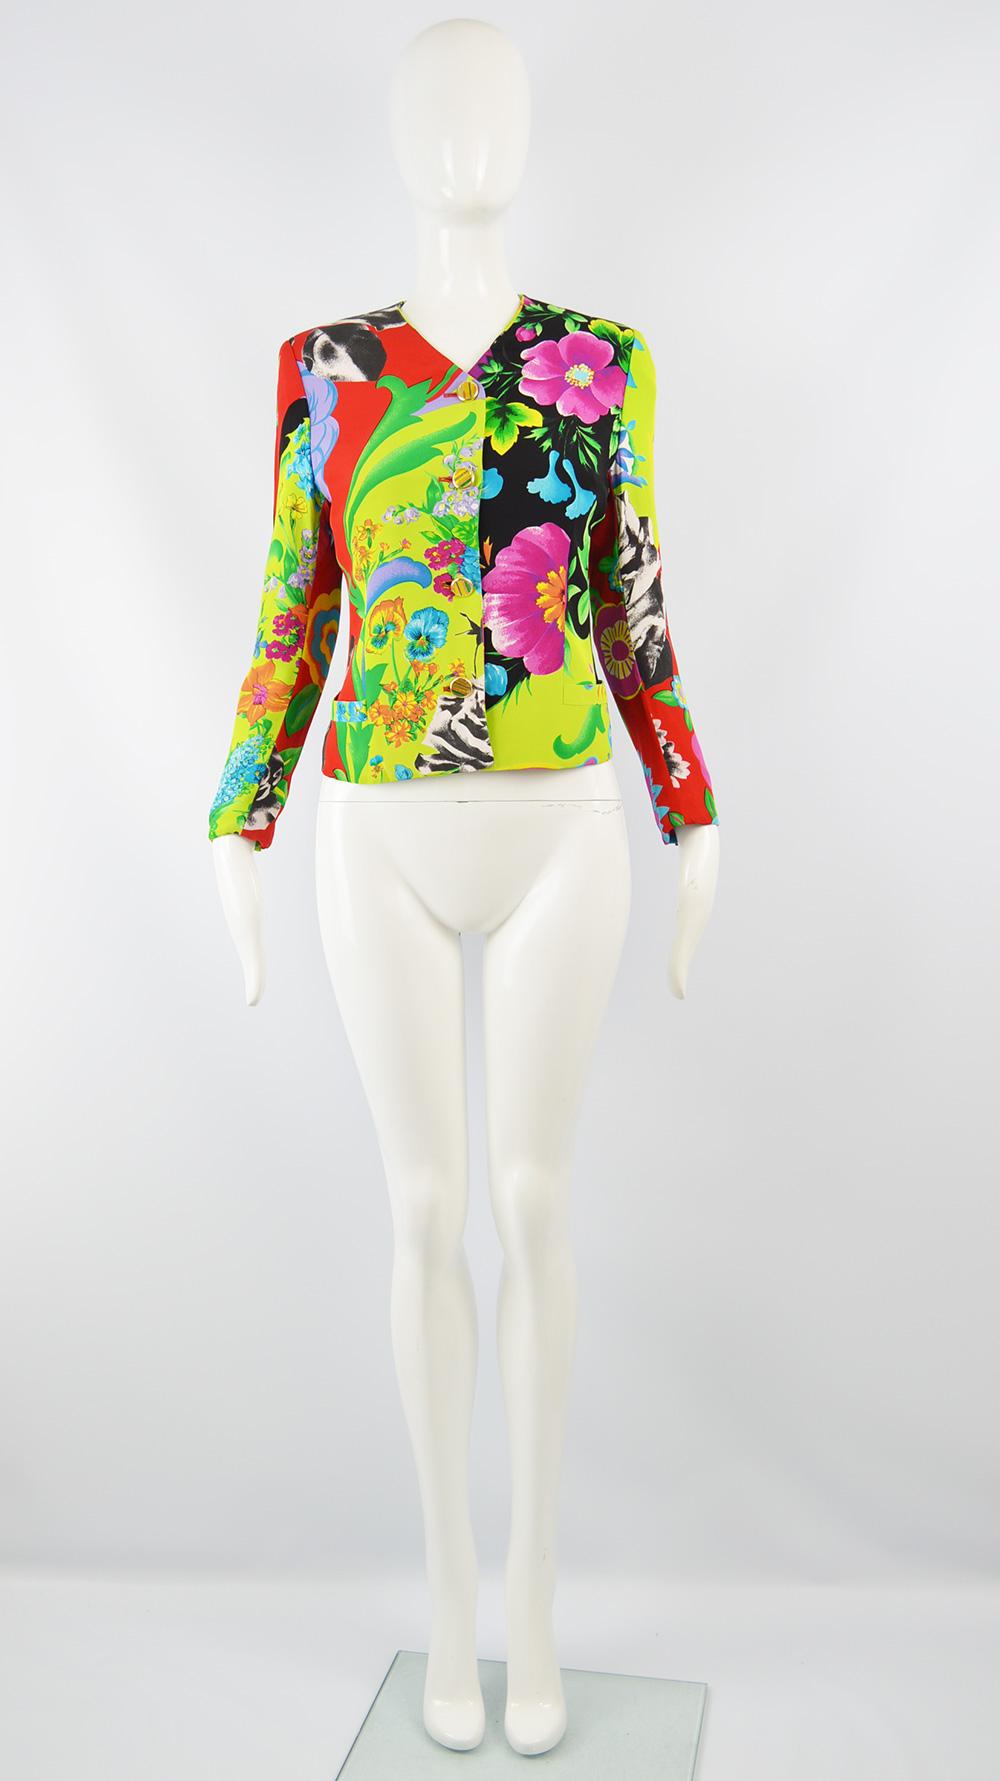 A fabulous women's vintage blazer jacket from the late 80s / early 90s by Gianni Versace for the Istante line. In a brightly multicolored fabric with a tropical floral print throughout in hues of green, black, pink, blue and red. Perfect for a bold